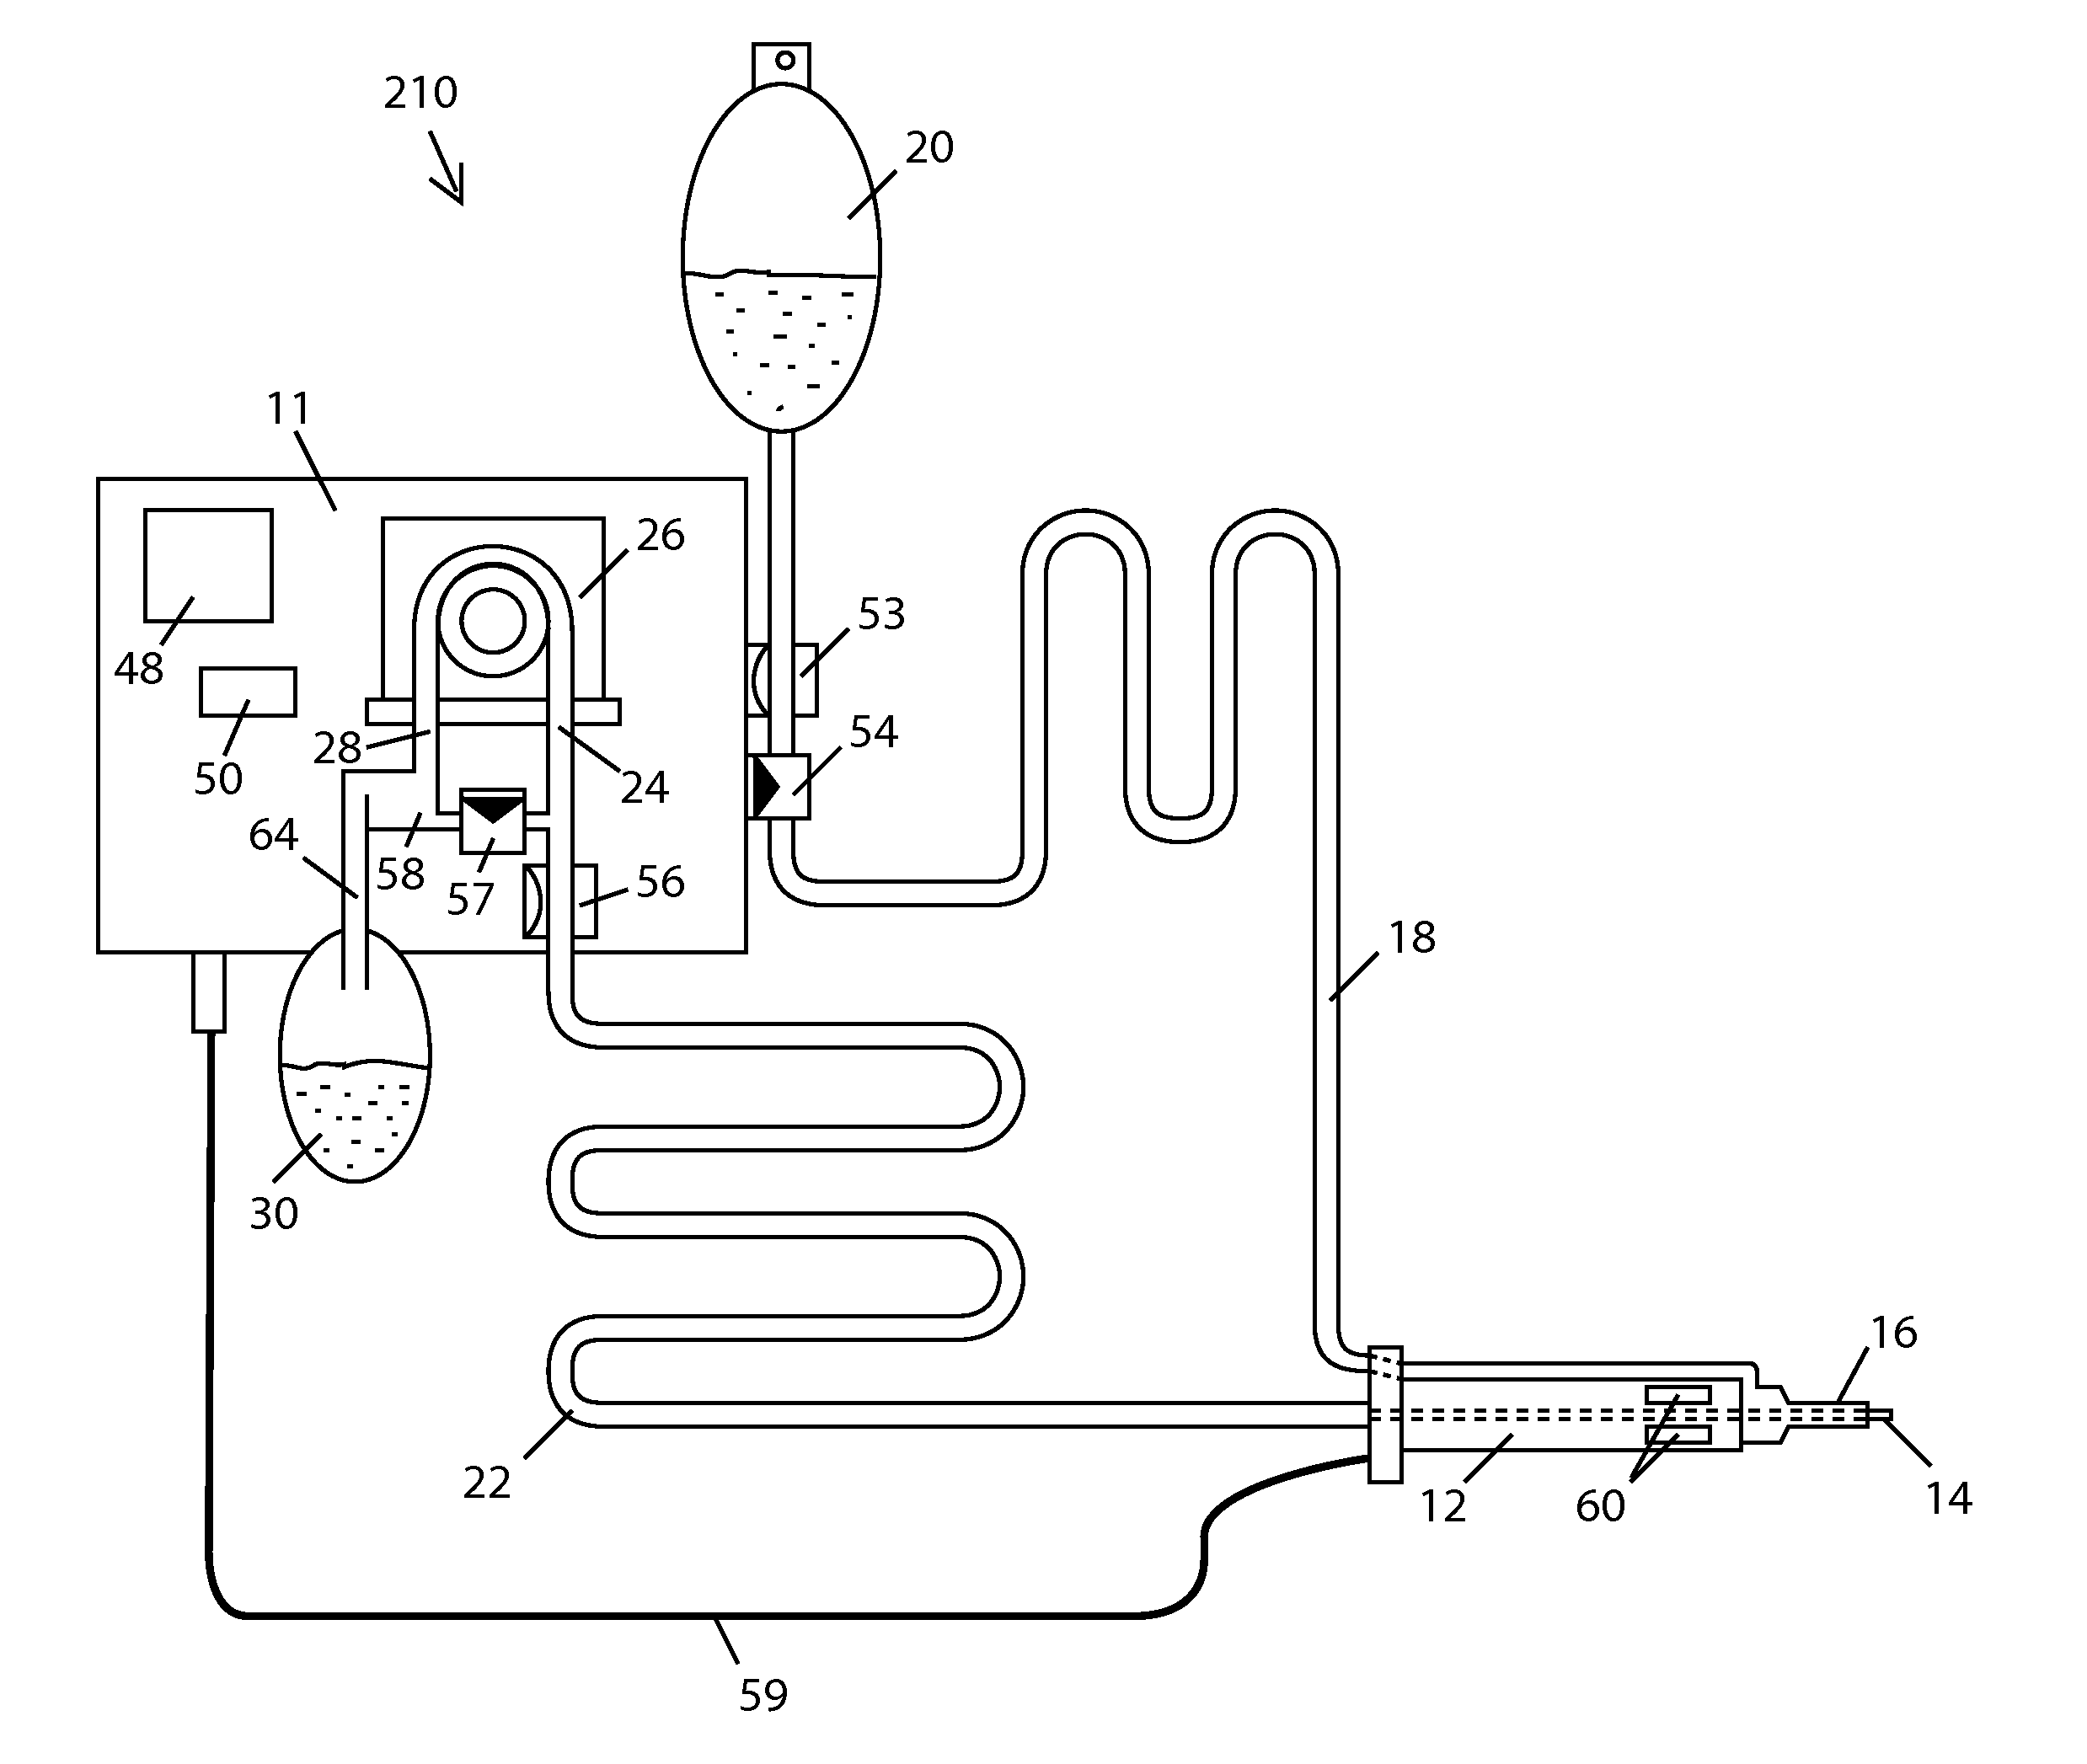 Post-occlusion chamber collapse suppressing system for a surgical apparatus and method of use